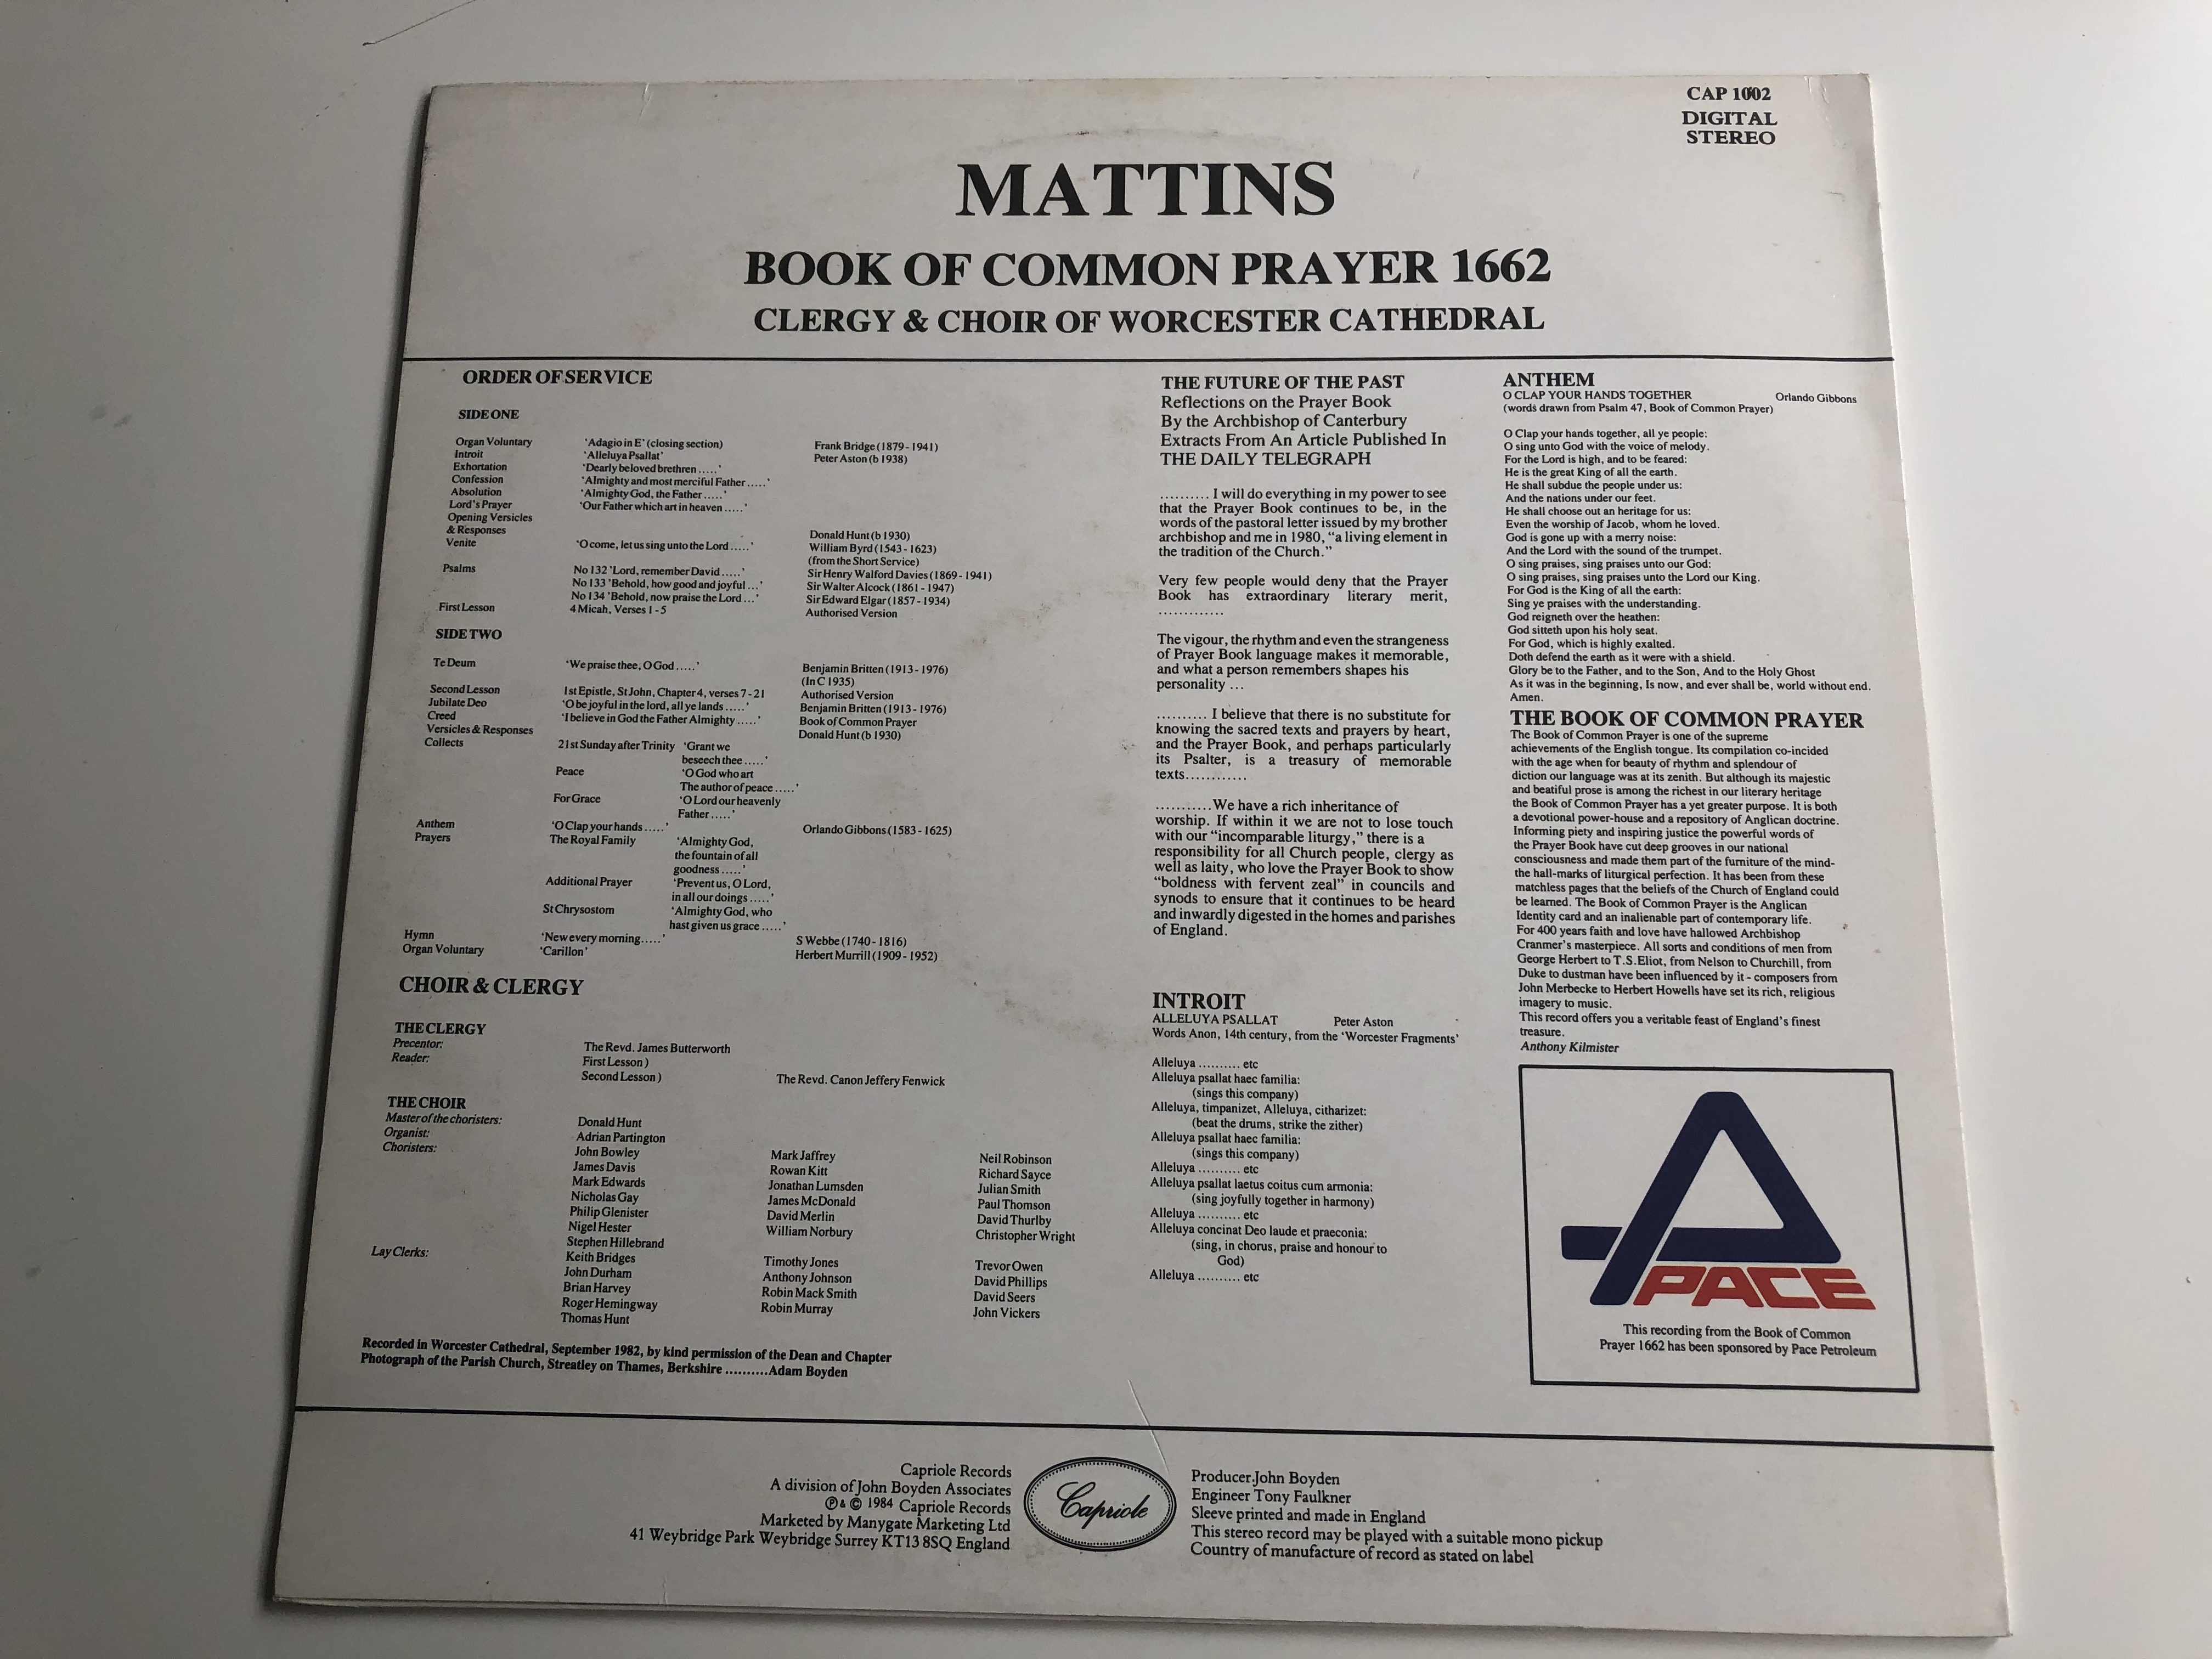 mattins-book-of-common-prayer-1662-clergy-choir-of-worcester-cathedral-heritage-of-england-series-capriole-lp-1984-stereo-cap-1002-2-.jpg